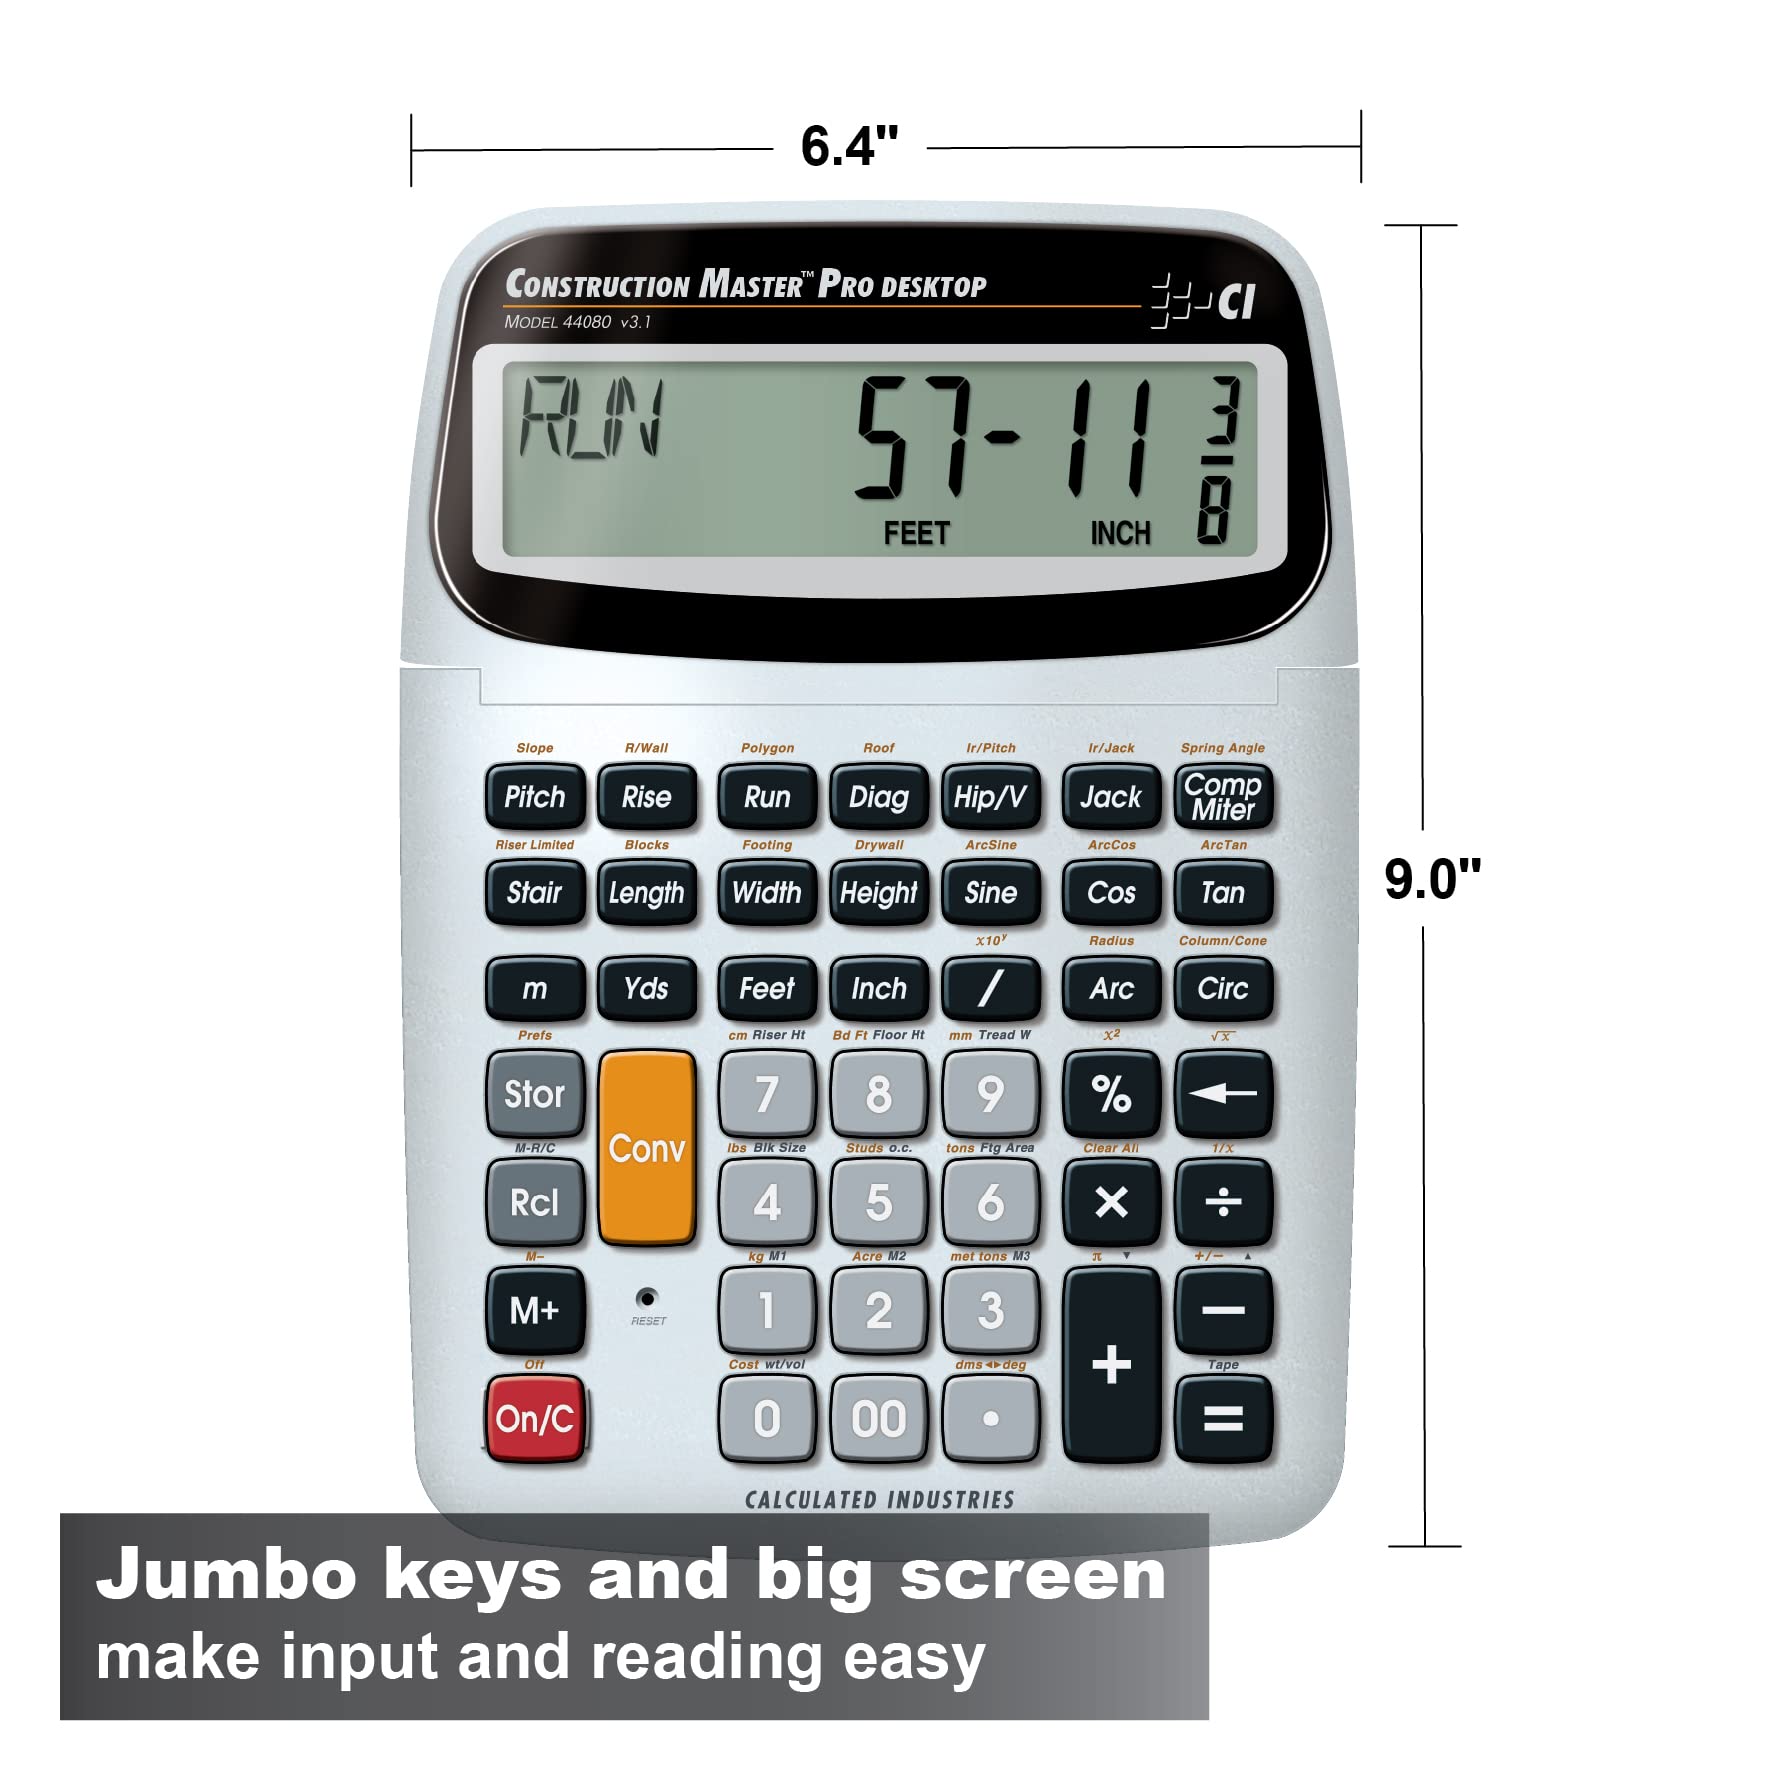 Calculated Industries 44080 Construction Master Pro-Desktop Advanced Construction Math Feet-Inch-Fraction Calculator with Trig Tool for Architects, Estimators, Contractors, Builders and Remodelers